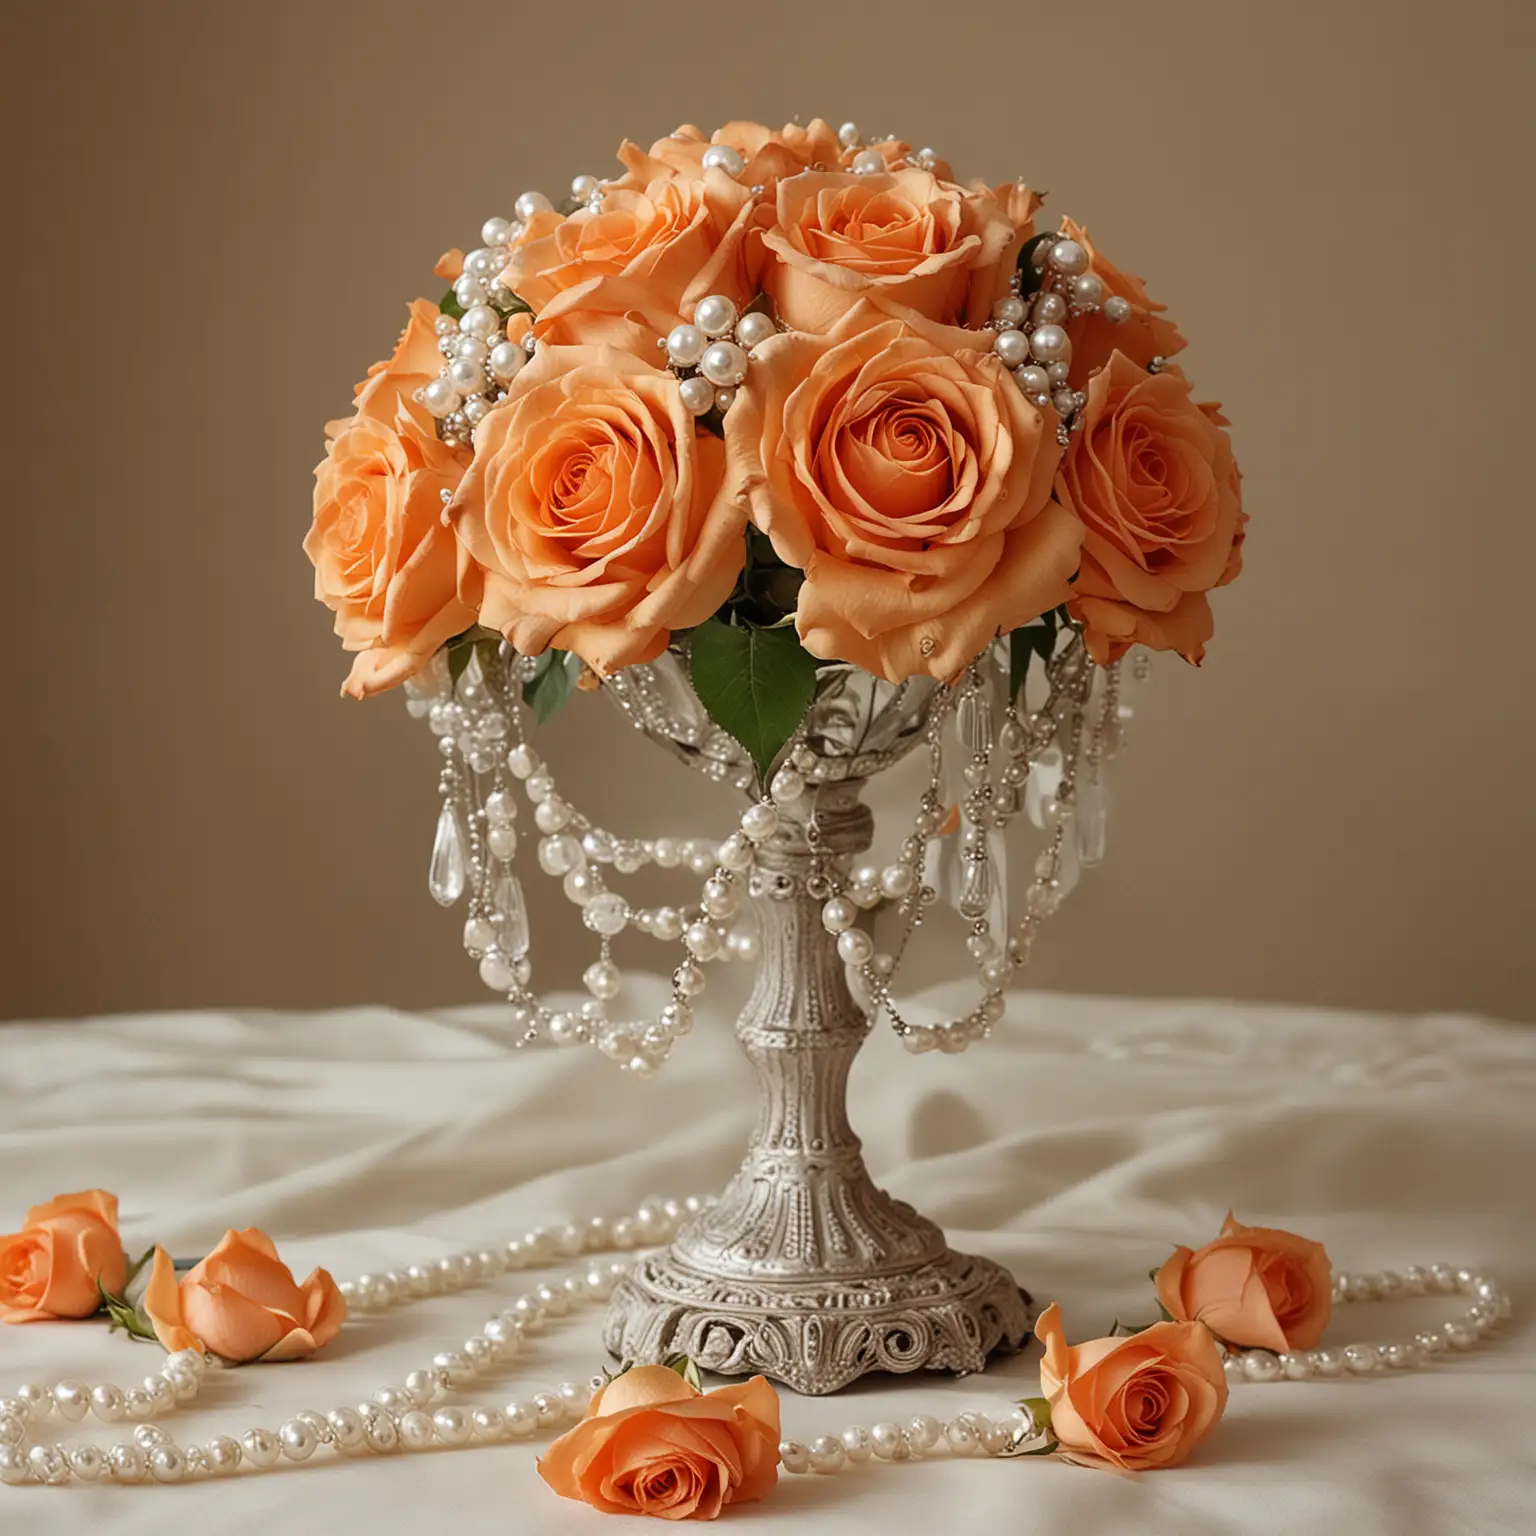 vintage wedding centerpiece with orange roses and pearls; nothing else in photo; keep the background neutral